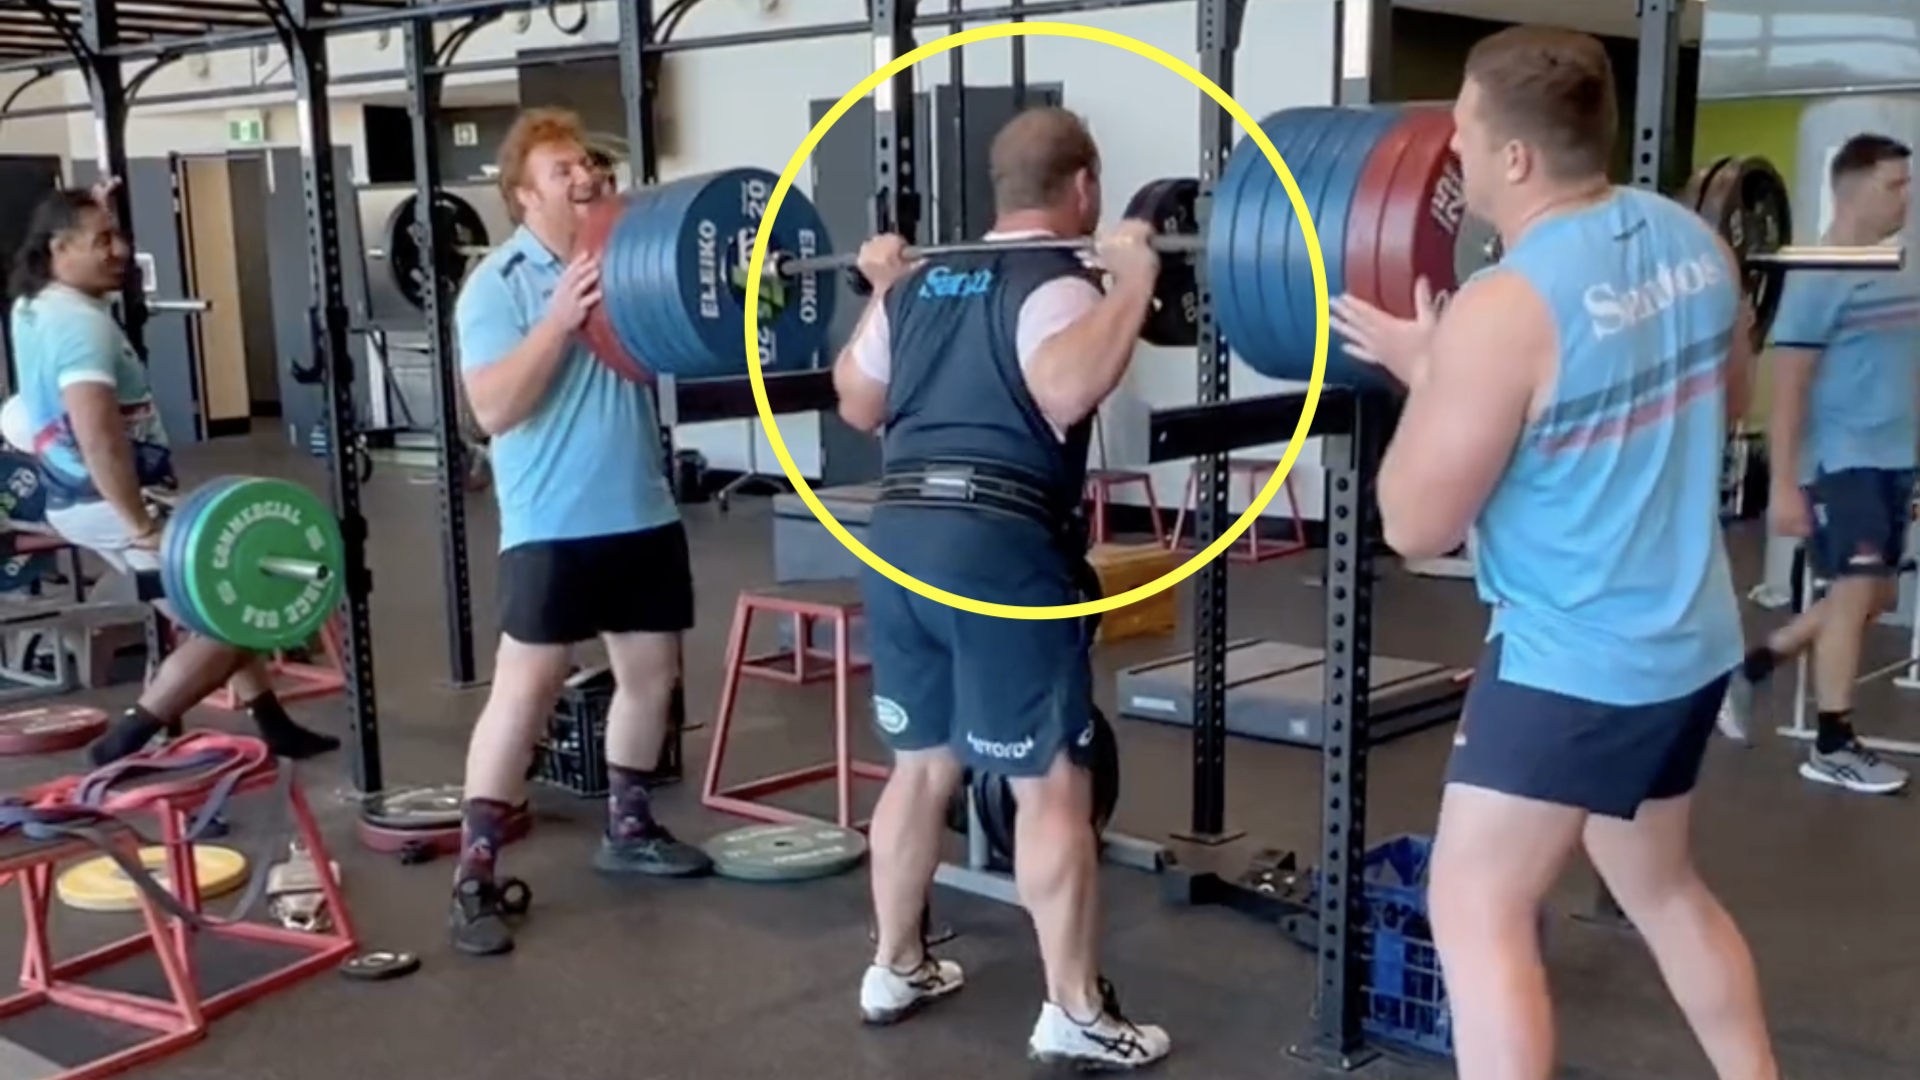 Wallabies coach puts players to shame at the squat rack